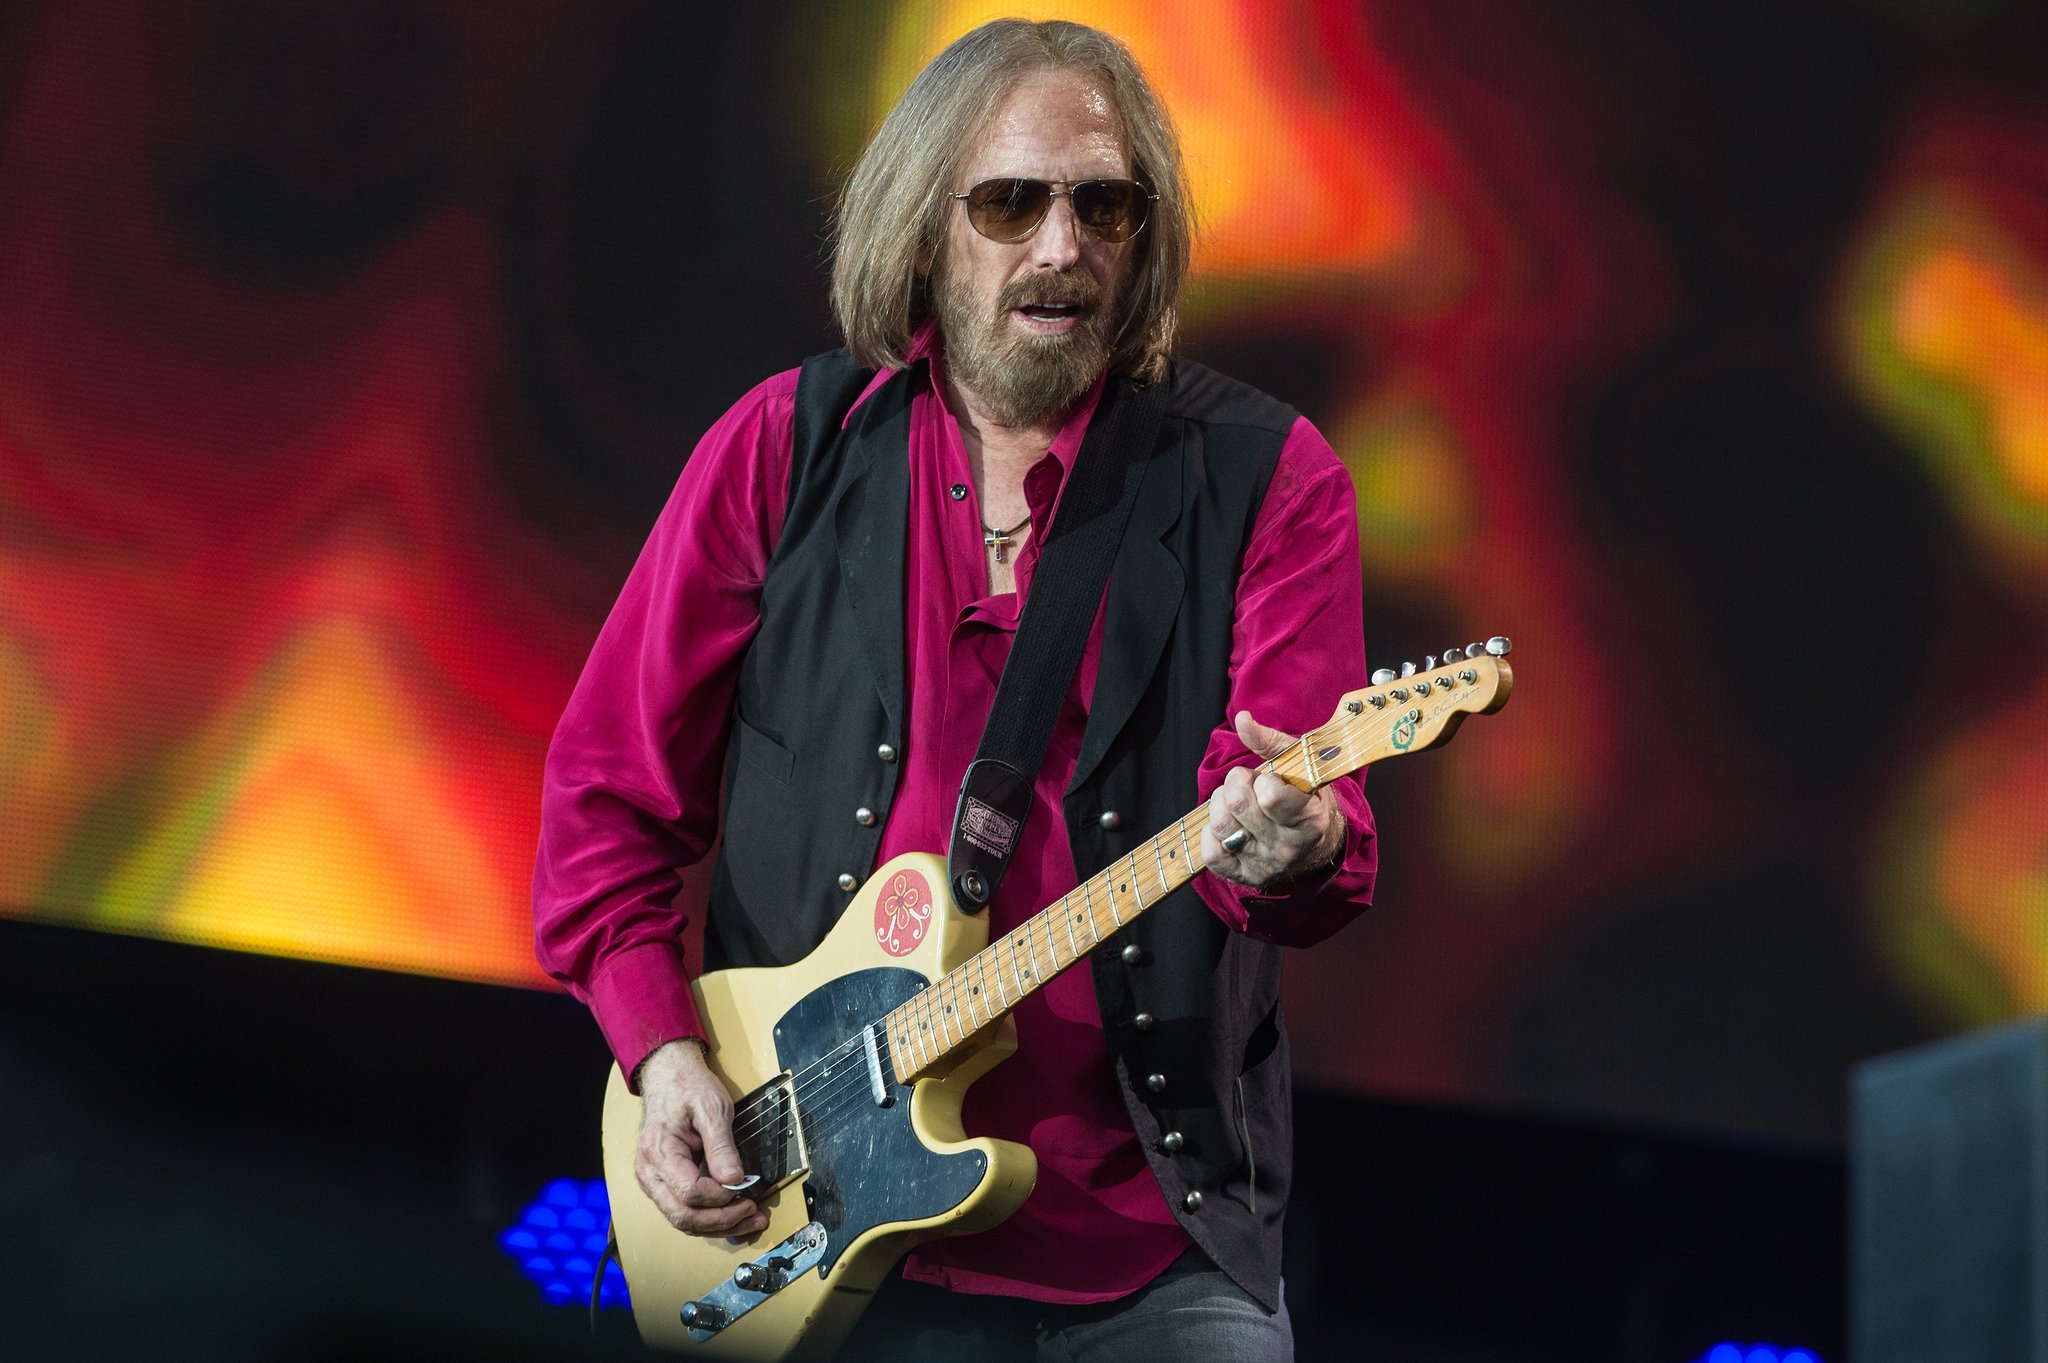 Tom Petty Song sold more than 6,000% after his Death